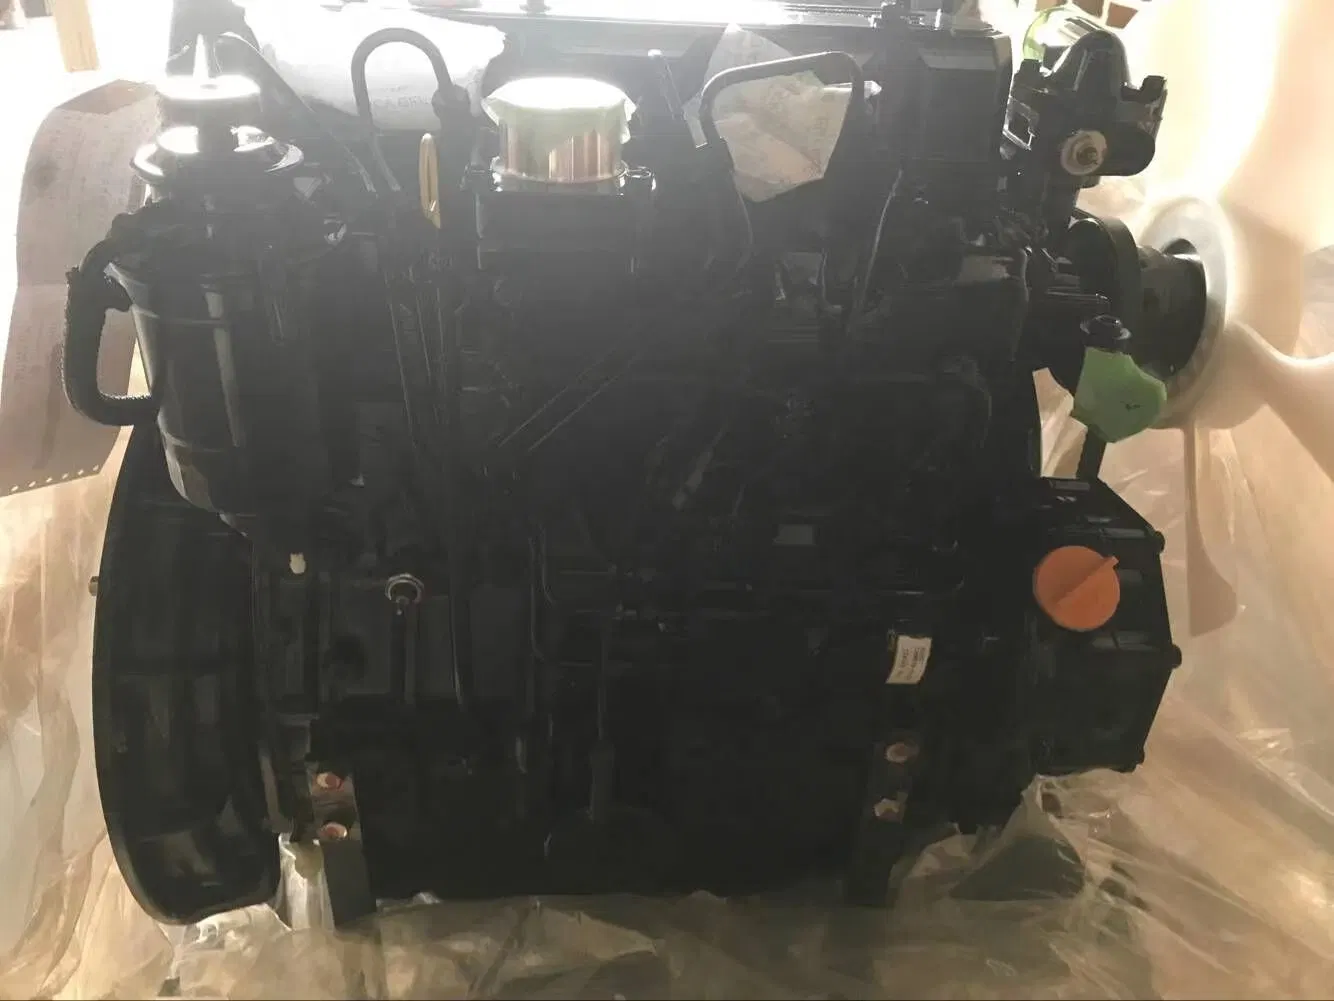 Yanmar Diesel Engines 2tnv98 Are Used in Marine Engines Mini Digger Auto Parts